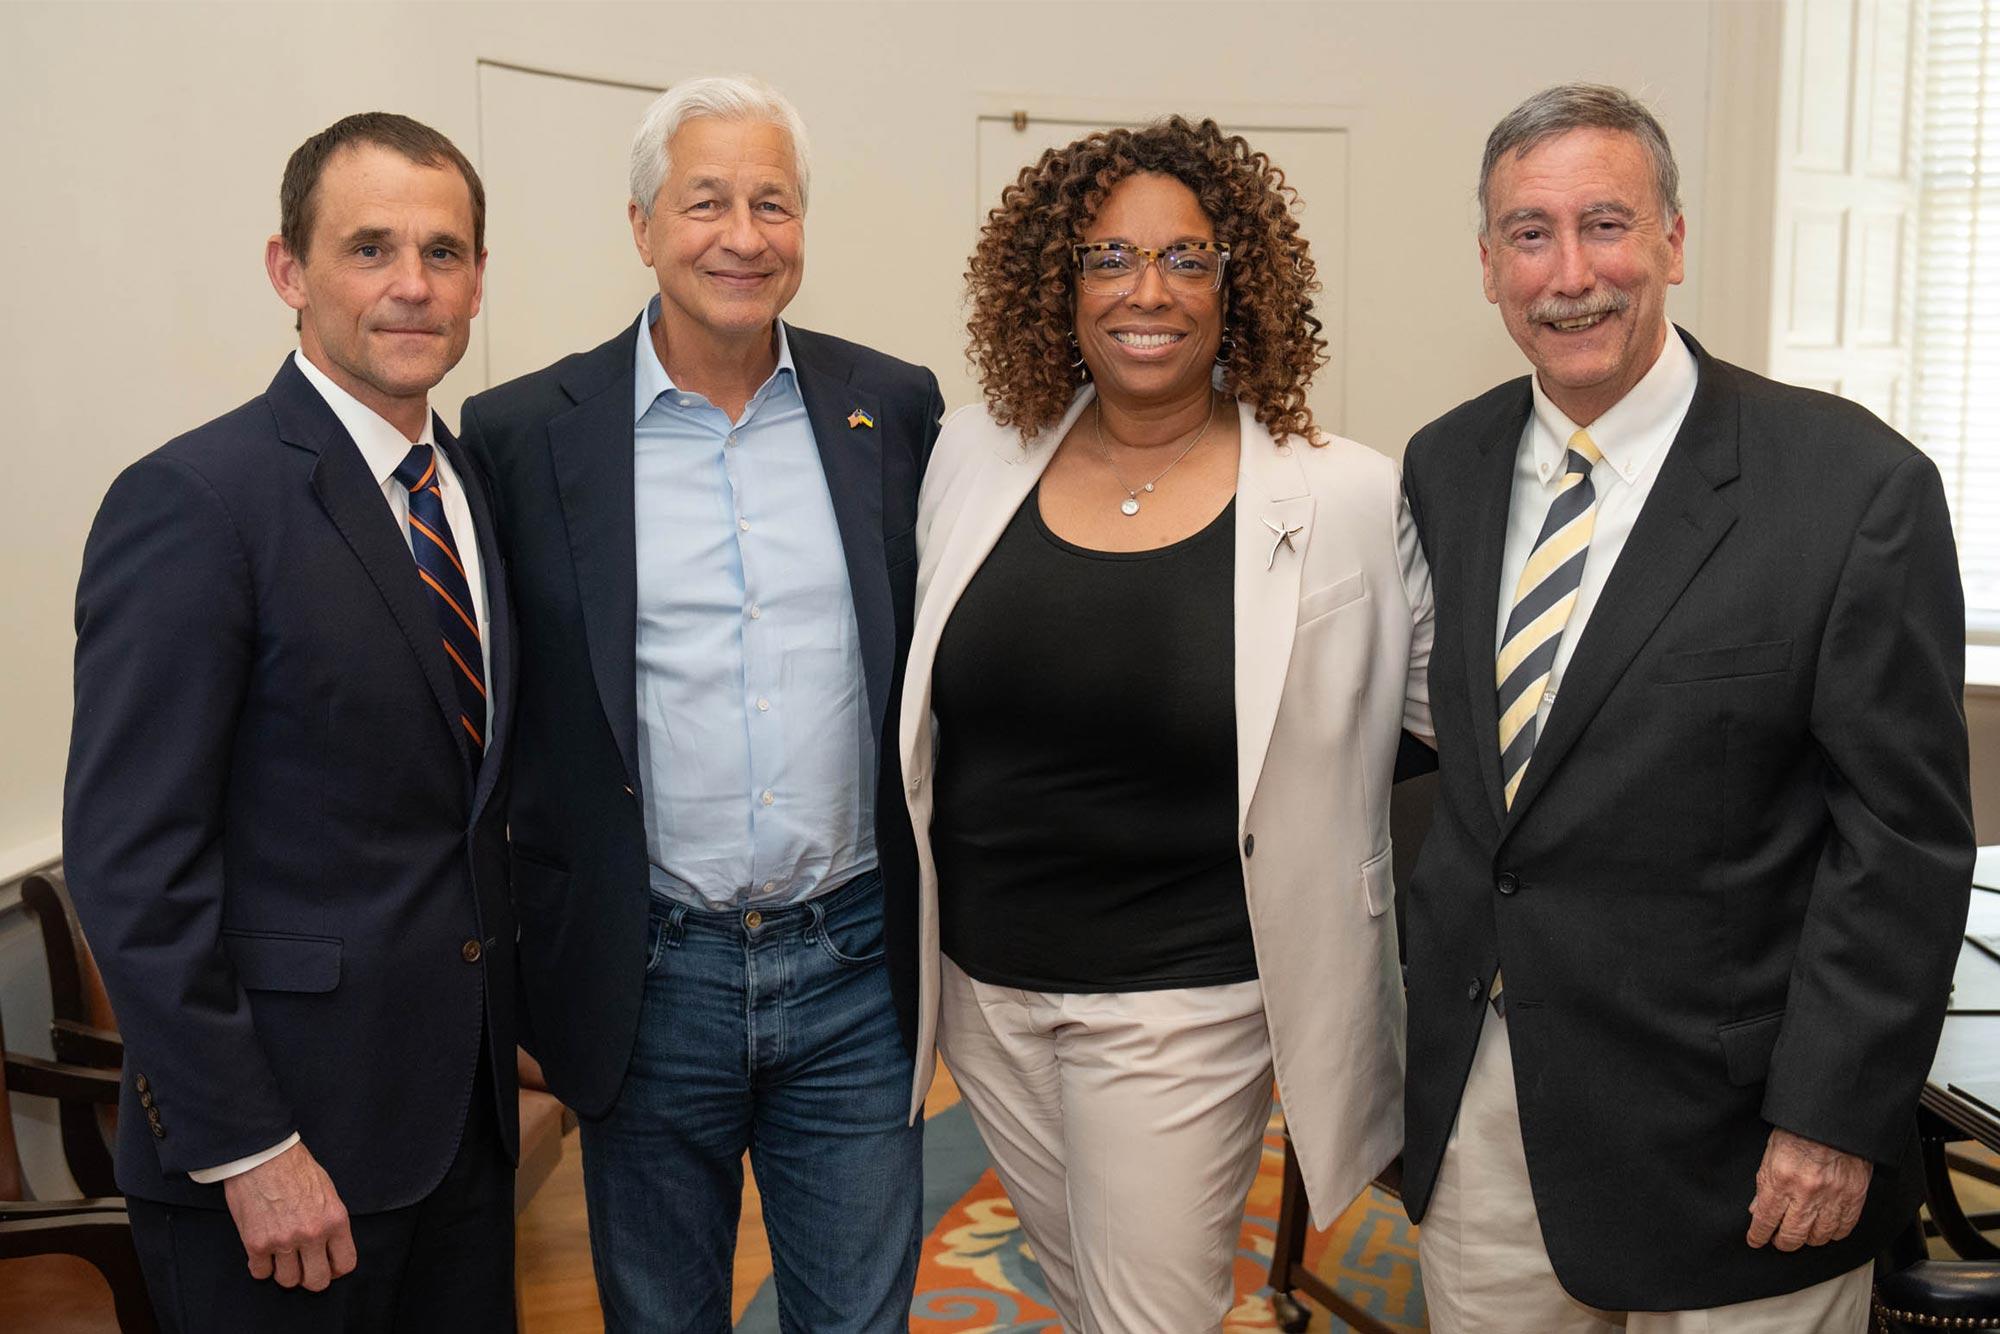 President Ryan, Jamie Dimon, Nicole Jenkins and Larry Sabato posing for a picture